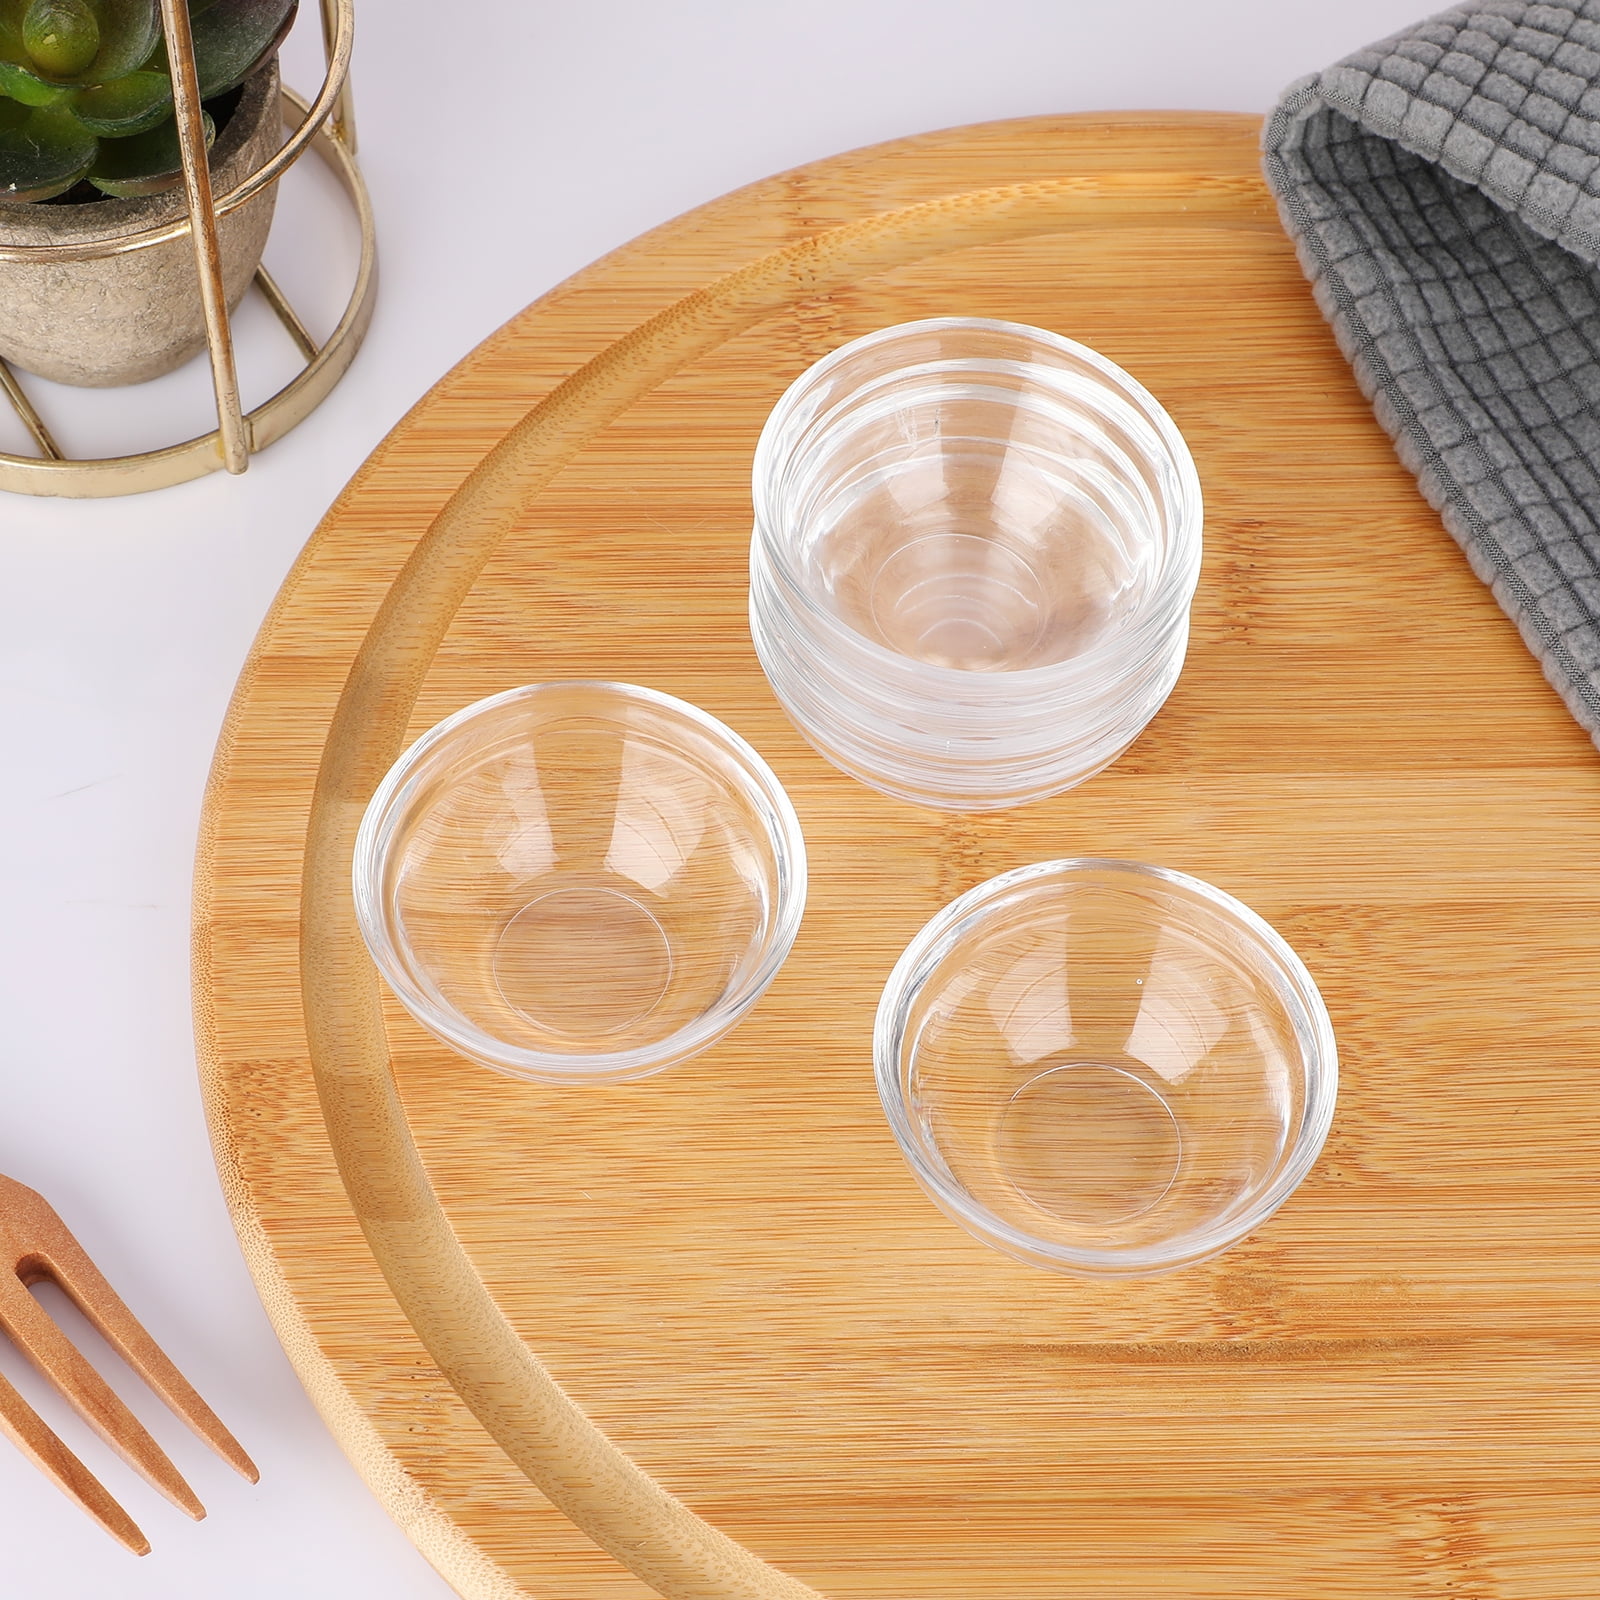 Tofficu 6pcs 2.4×1.2IN Mini Prep Bowls Glass Pudding Bowls Jelly Cups Small  Clear Glass Bowls Dessert Containers Kitchen